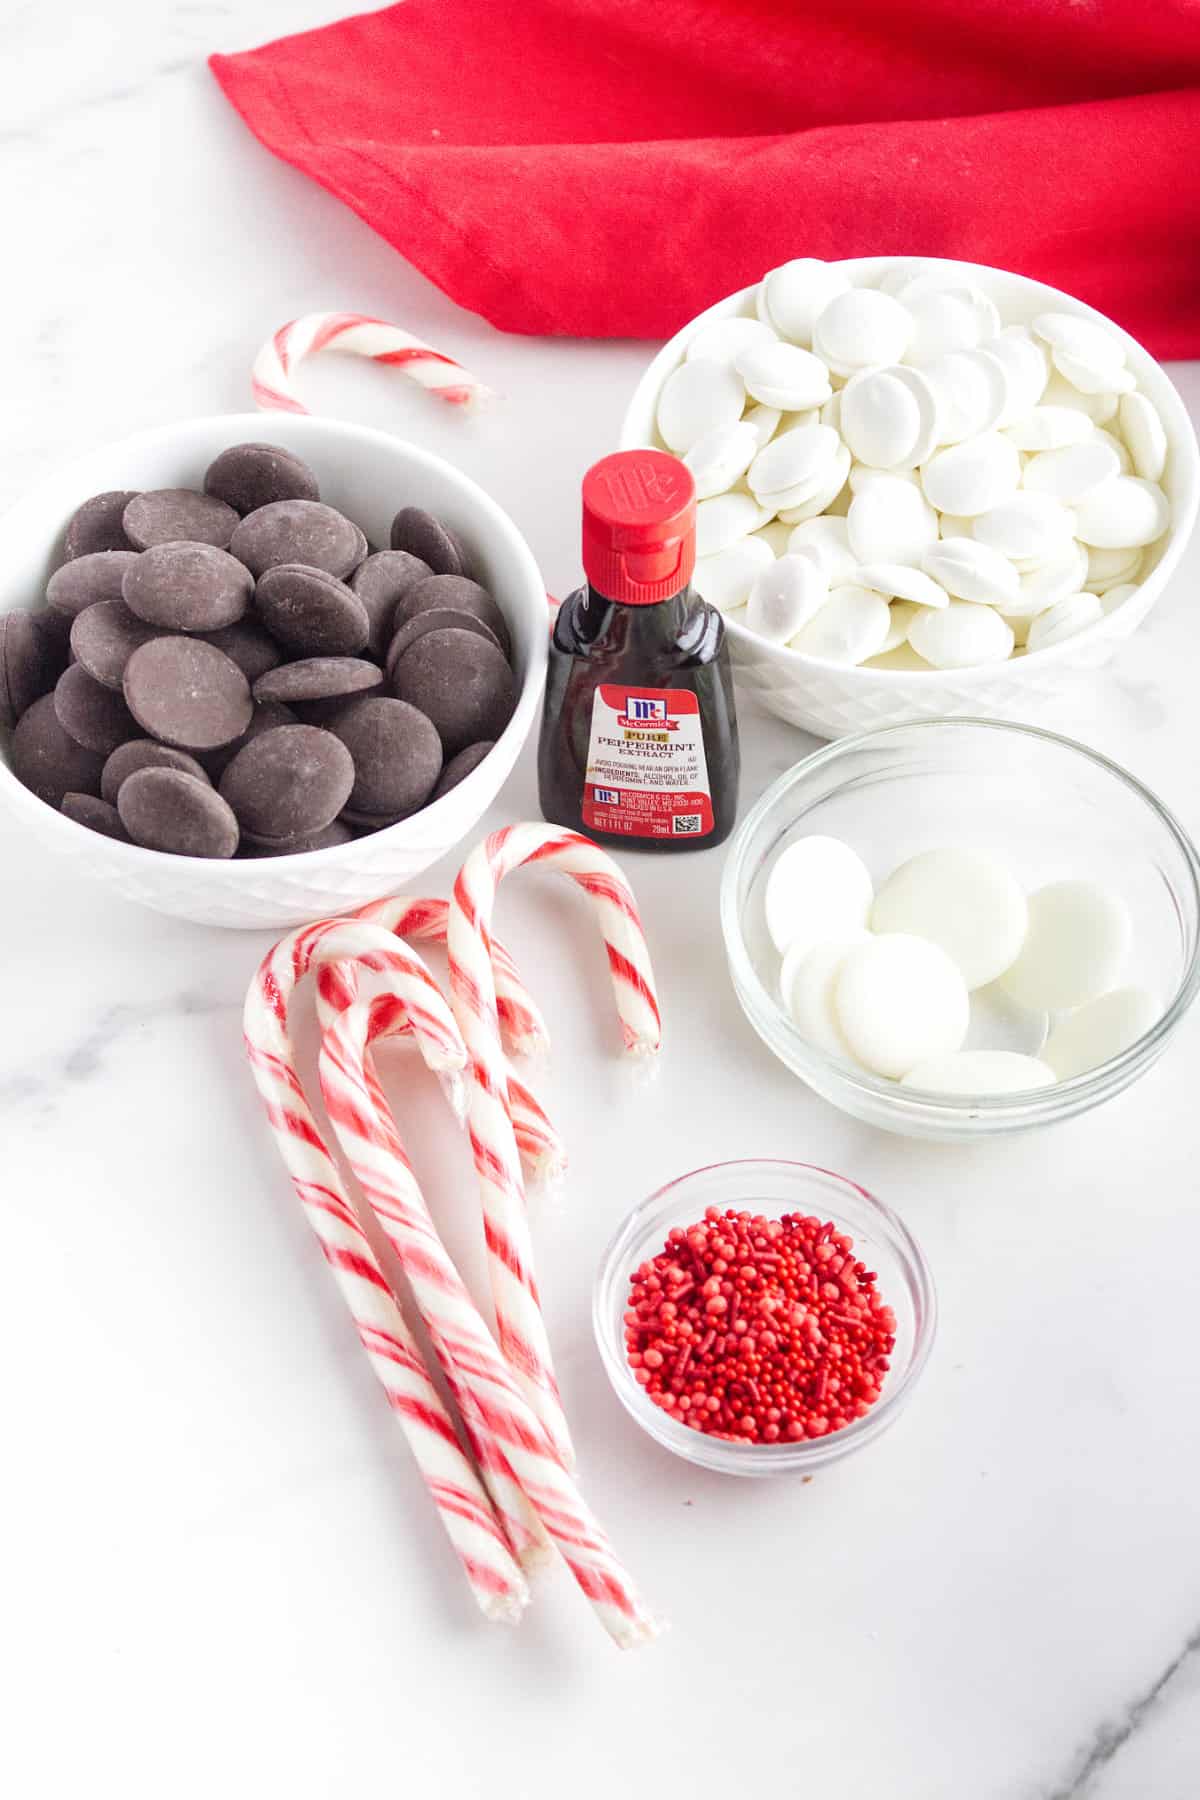 ingredients for making candy cane bark.